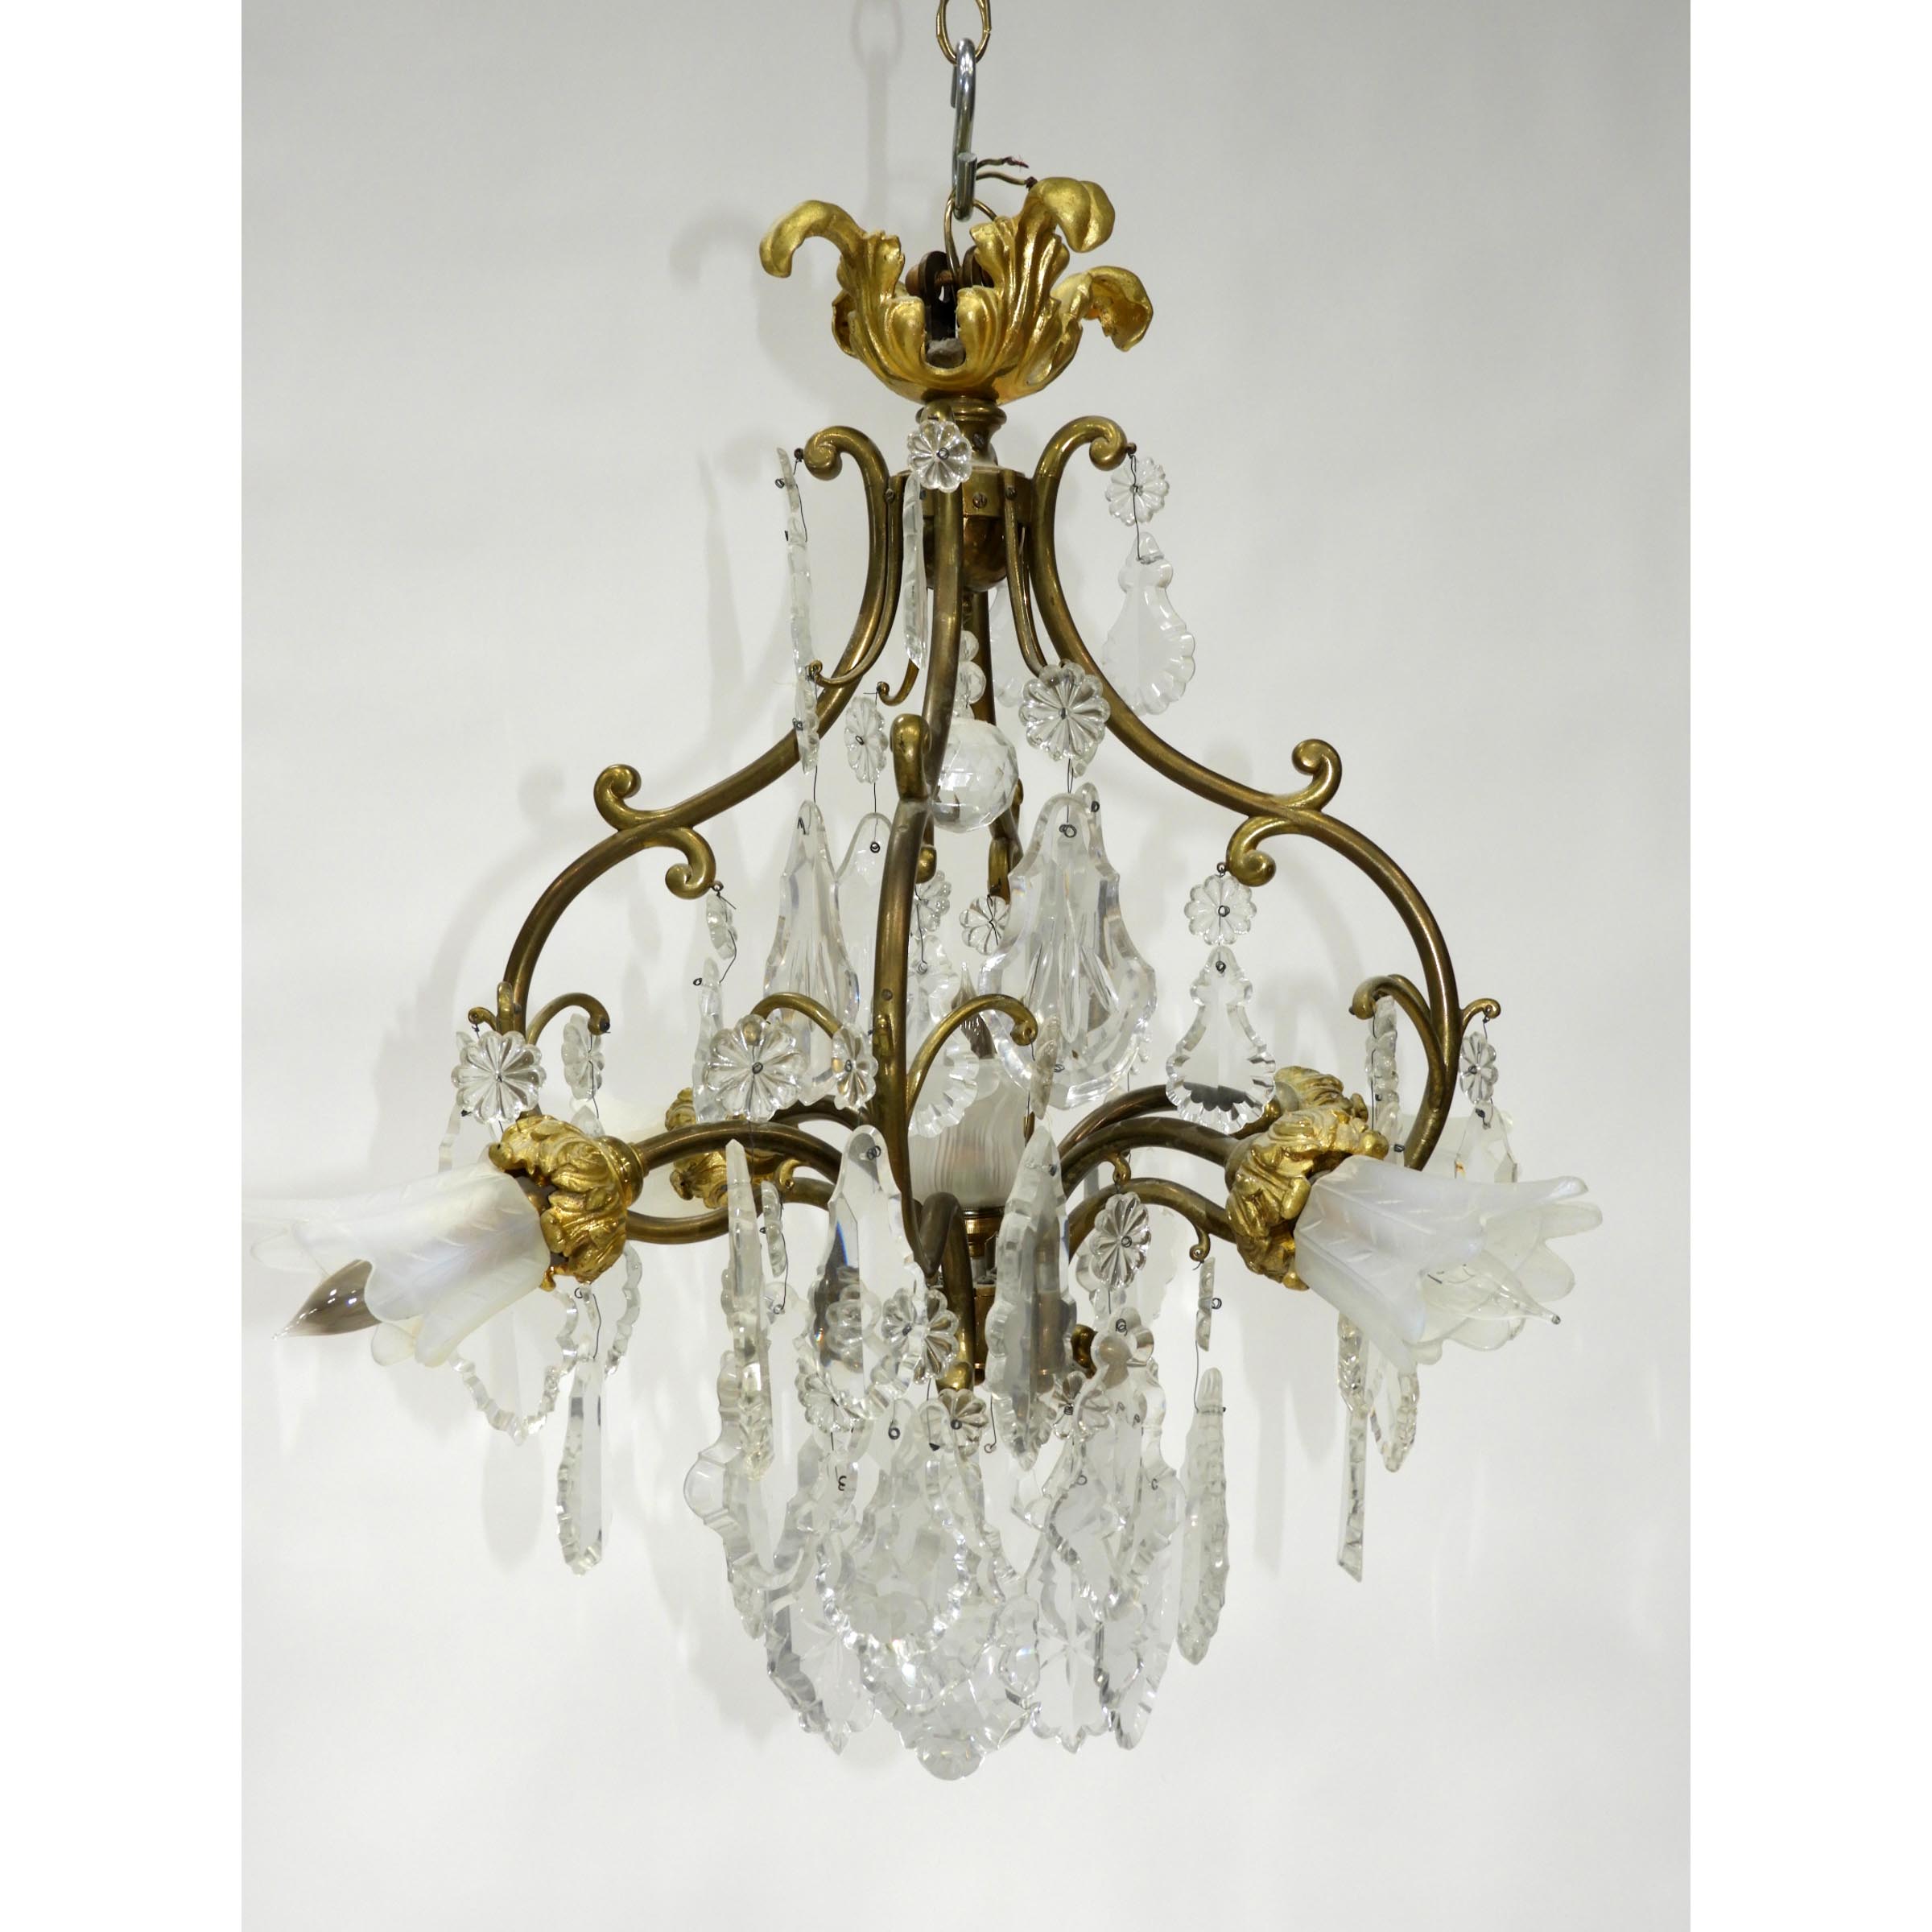 French Gilt Bronze and Cut Glass Five Light Chandelier